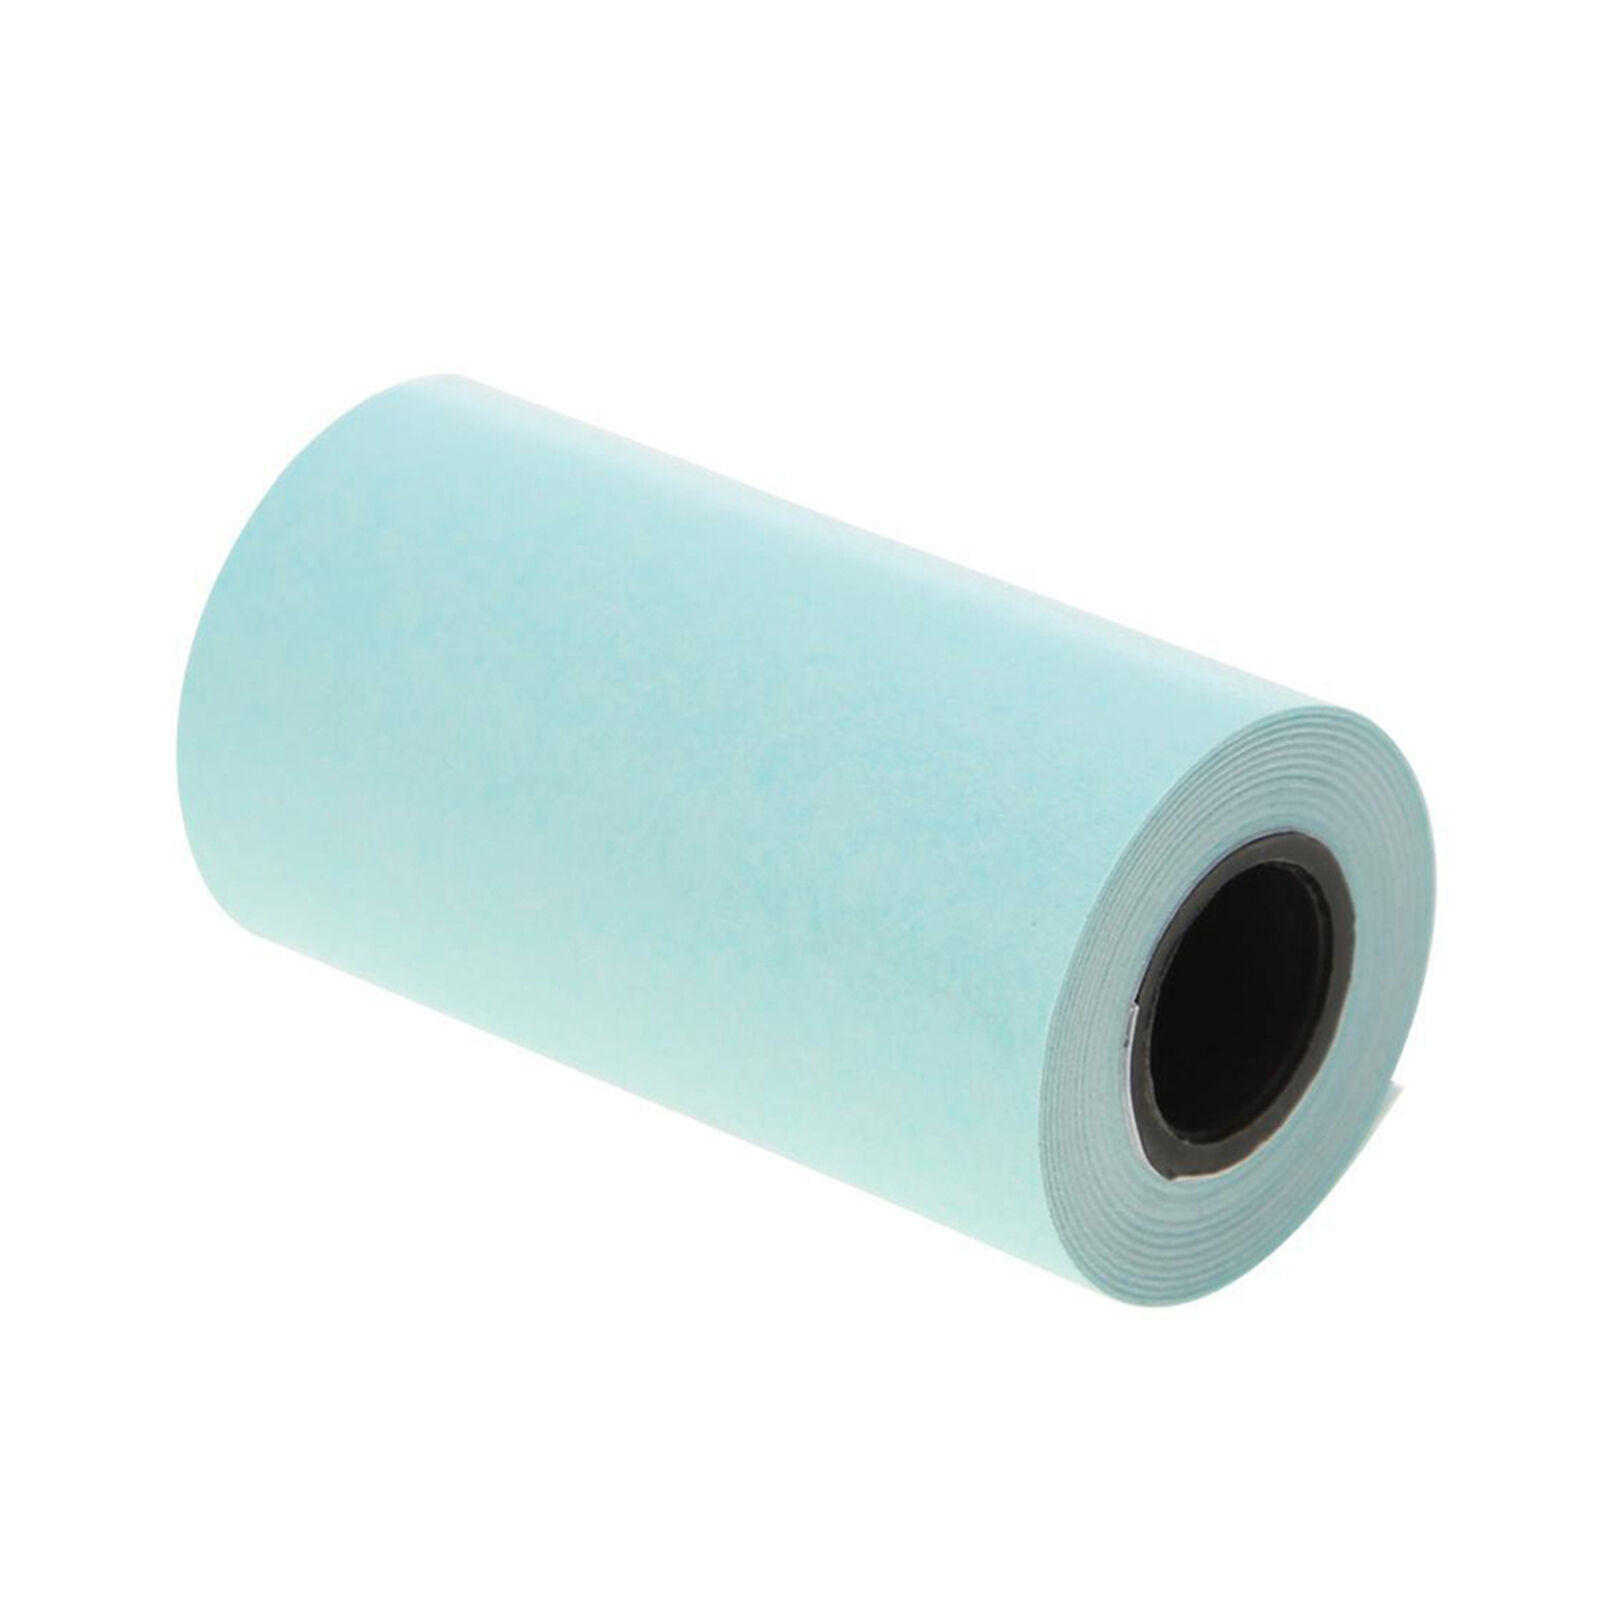 Thermal Tape Multi-use Hard to Fade Thermal Printing Paper Portable